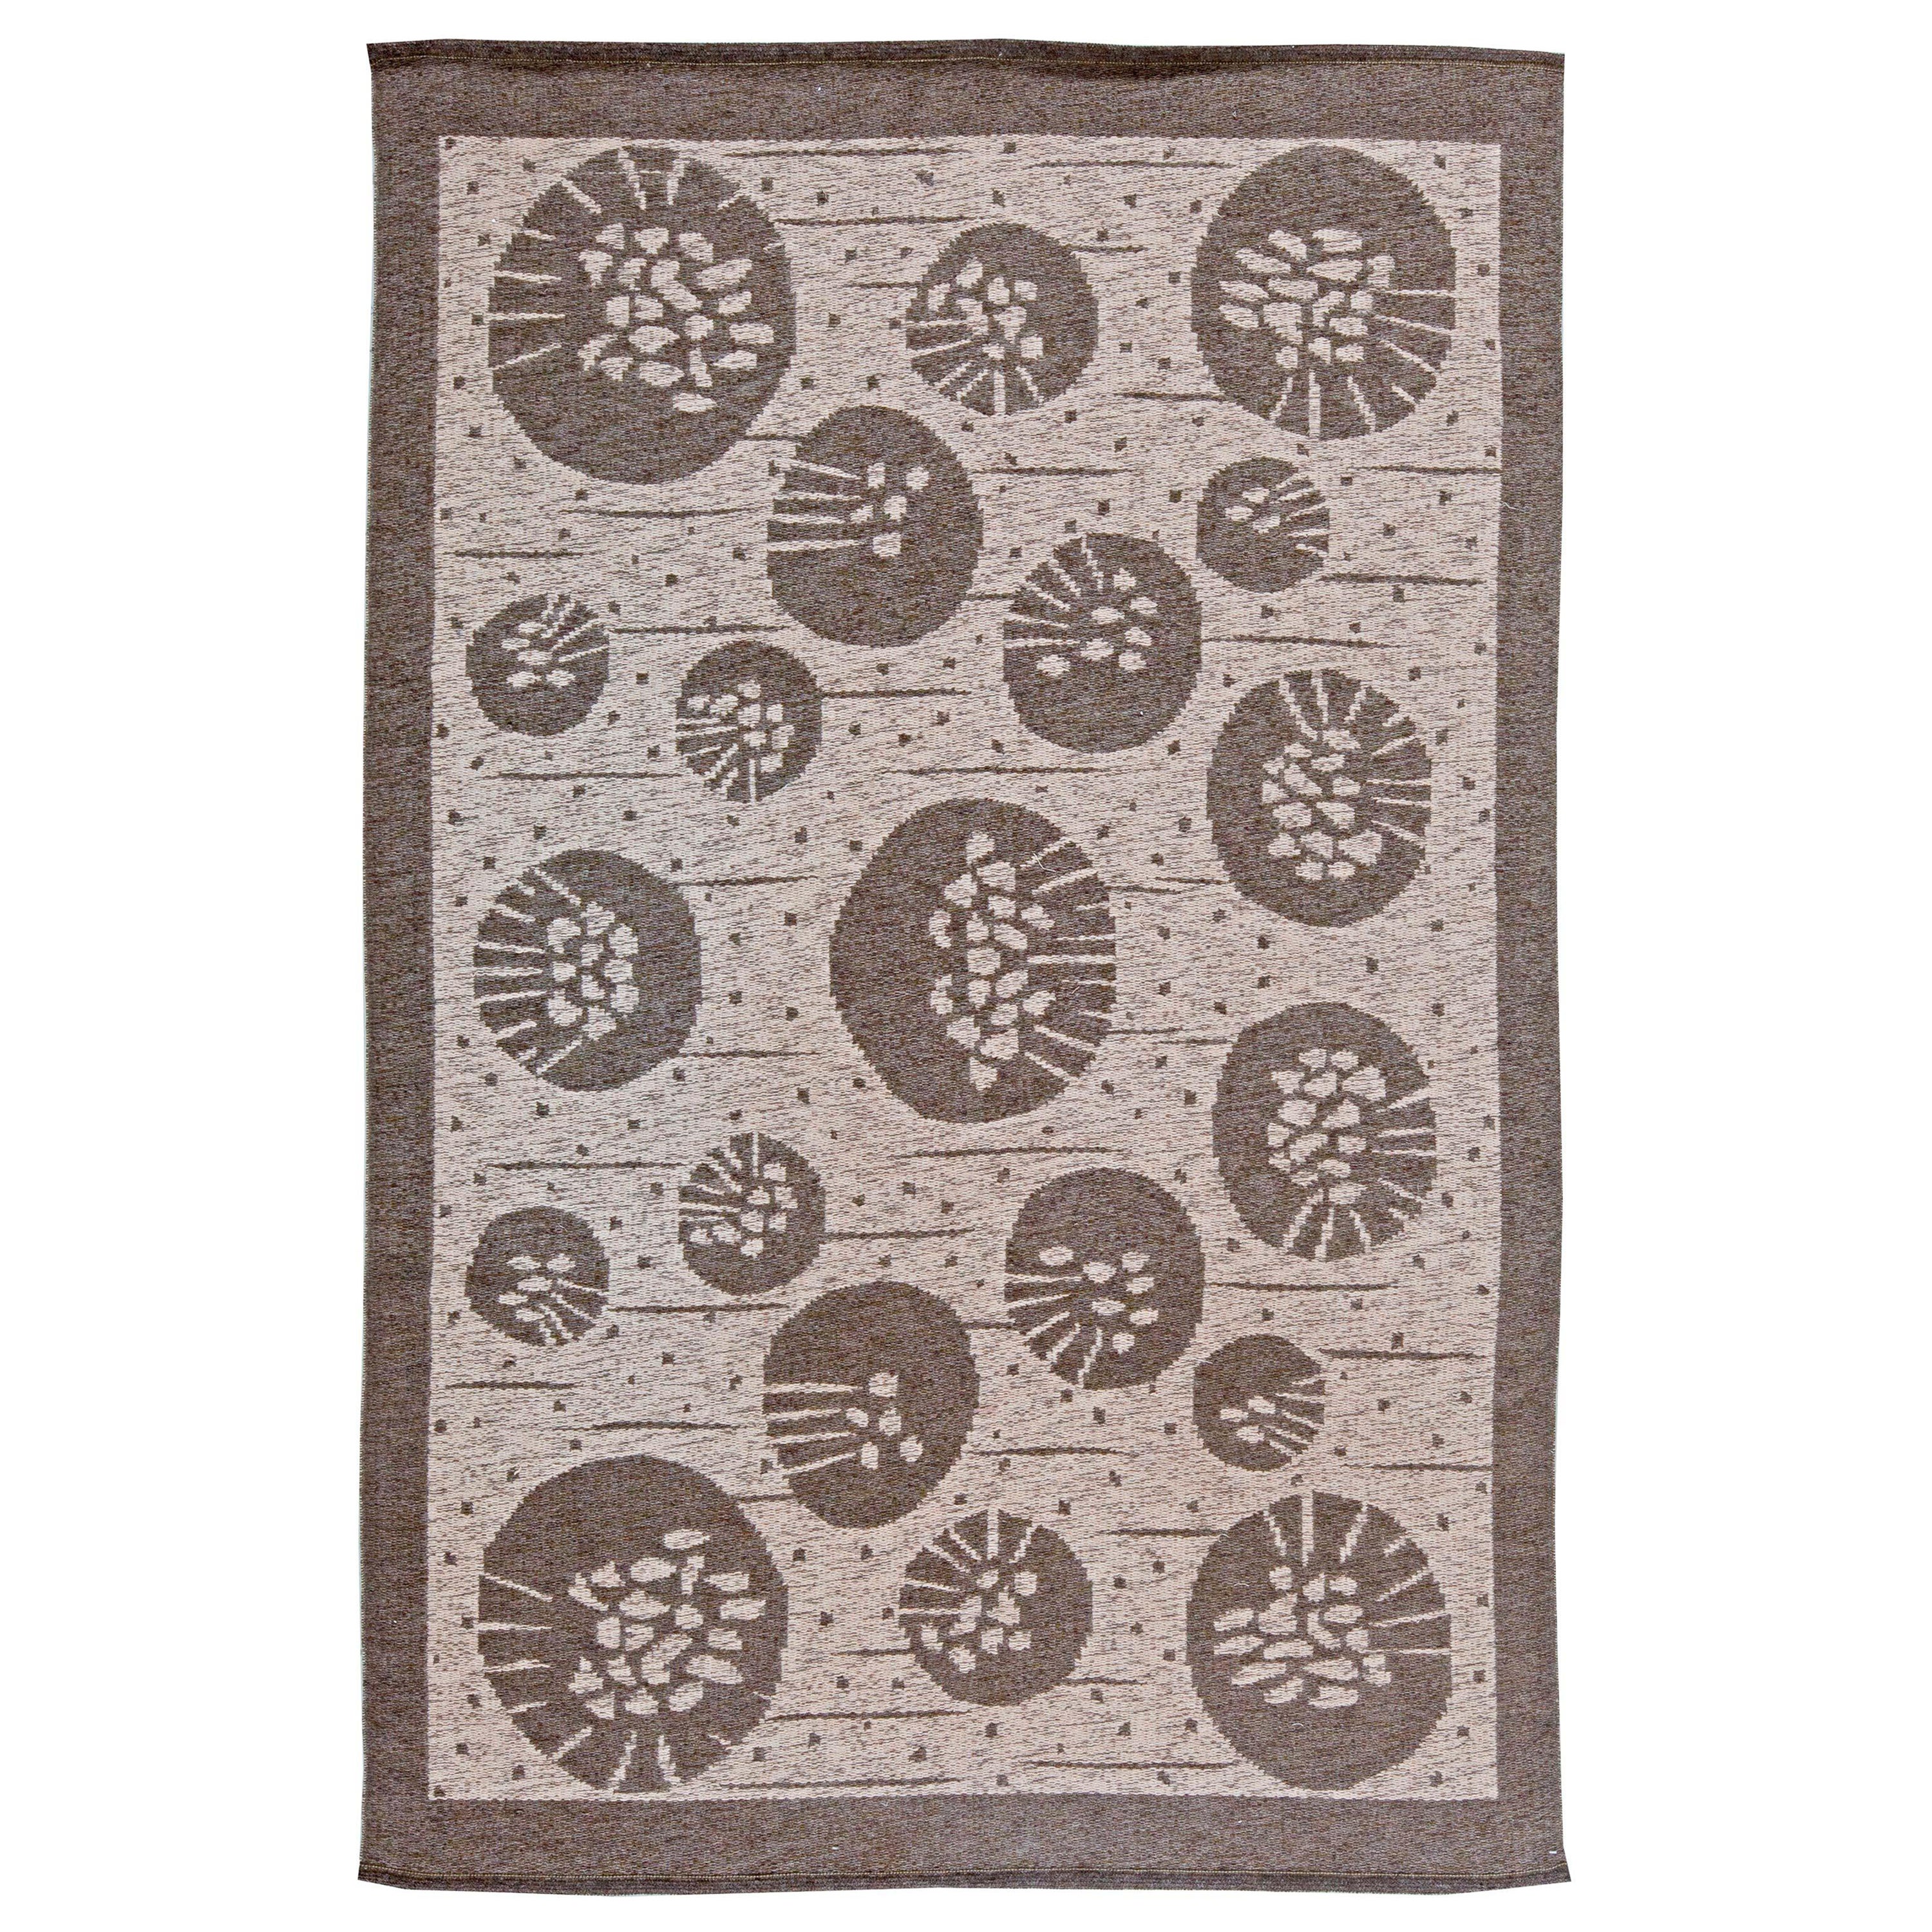 Midcentury Double Sided Swedish Flat-Weave Wool Rug by Orsa